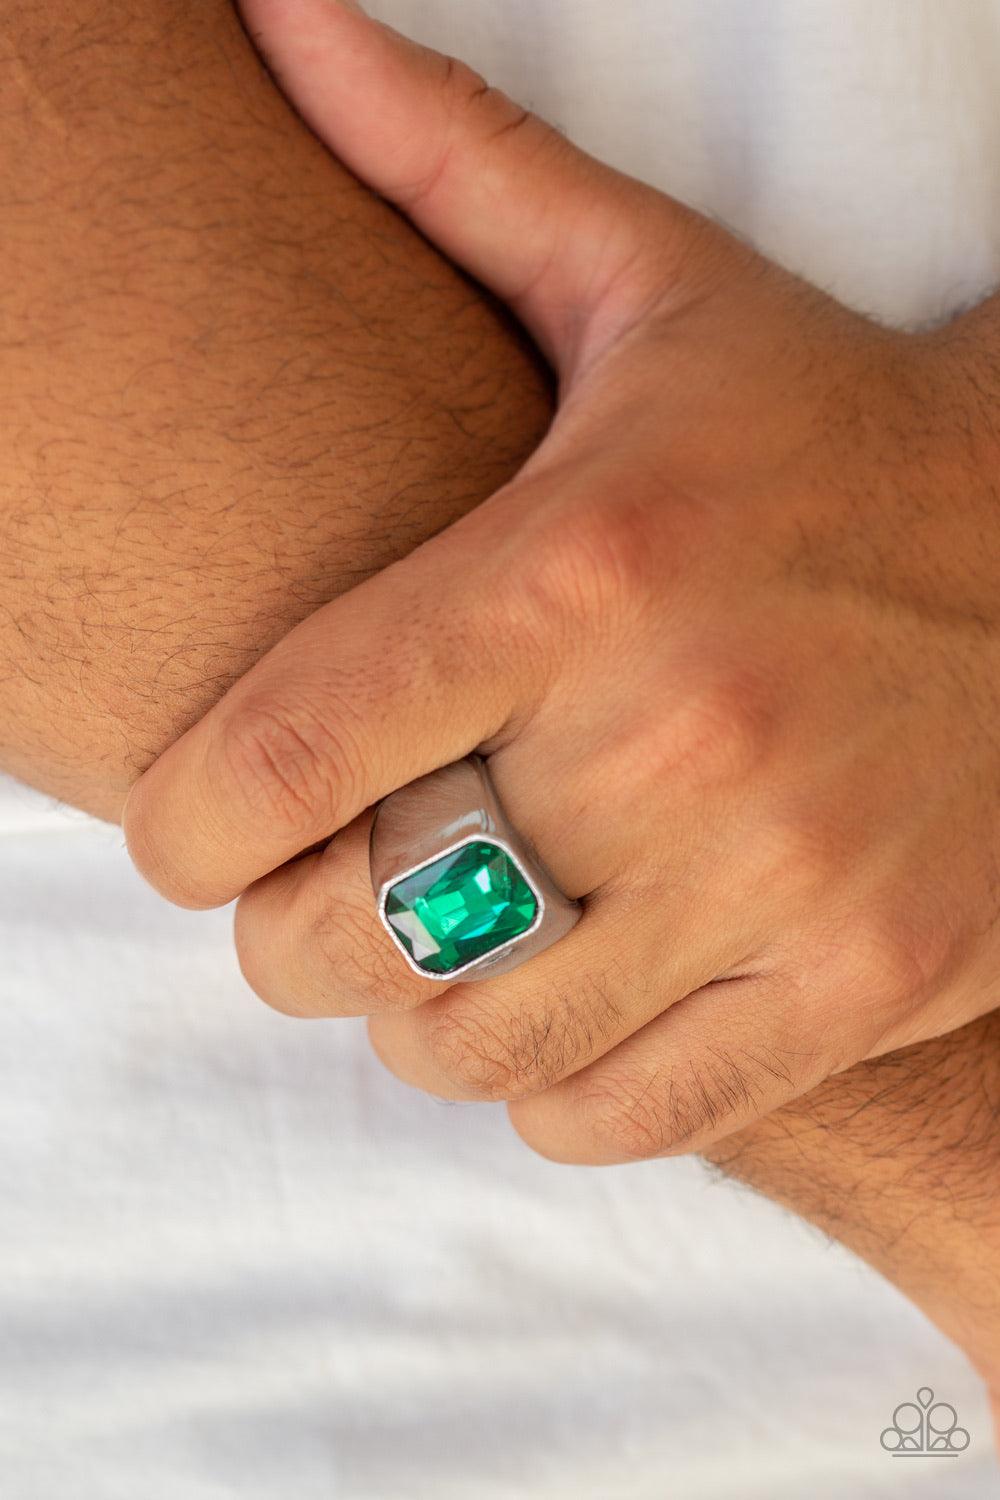 Paparazzi Accessories Scholar - Green Featuring a kingly emerald style cut, an oversized green rhinestone is pressed into the center of a glistening silver band for a statement look. Features a stretchy band for a flexible fit. Jewelry